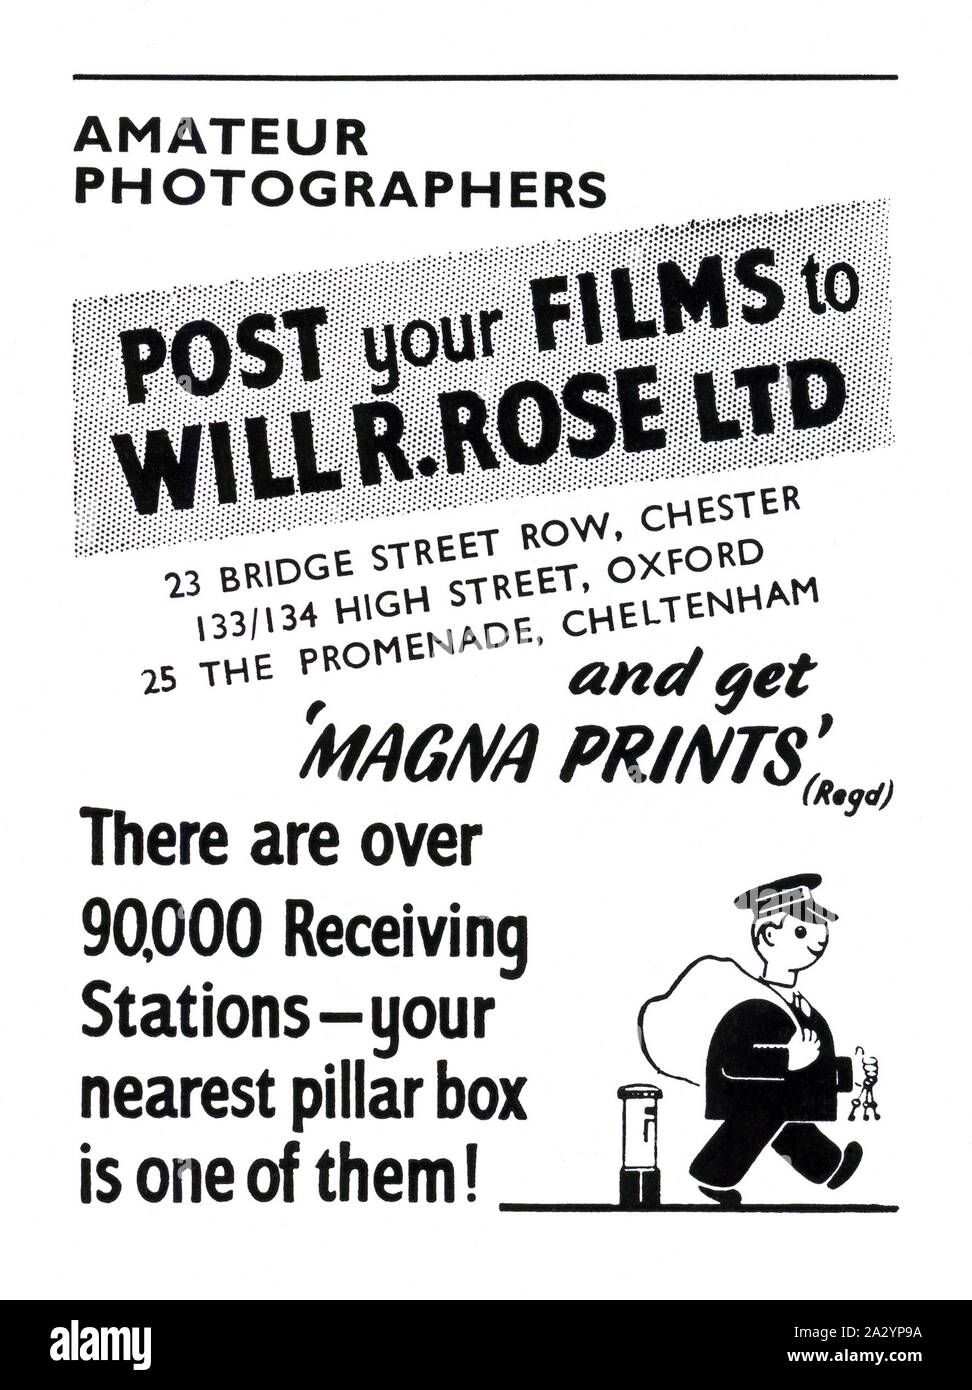 Advert for William R Rose's mail-order photographic print service, 1951.  The illustration features a postman collecting mail from a post box. Amateur photographers could post their negatives to the company and receive back 'Magna Prints' in the mail. Many companies offer much the same service today but nearly all business is conducted online. Stock Photo